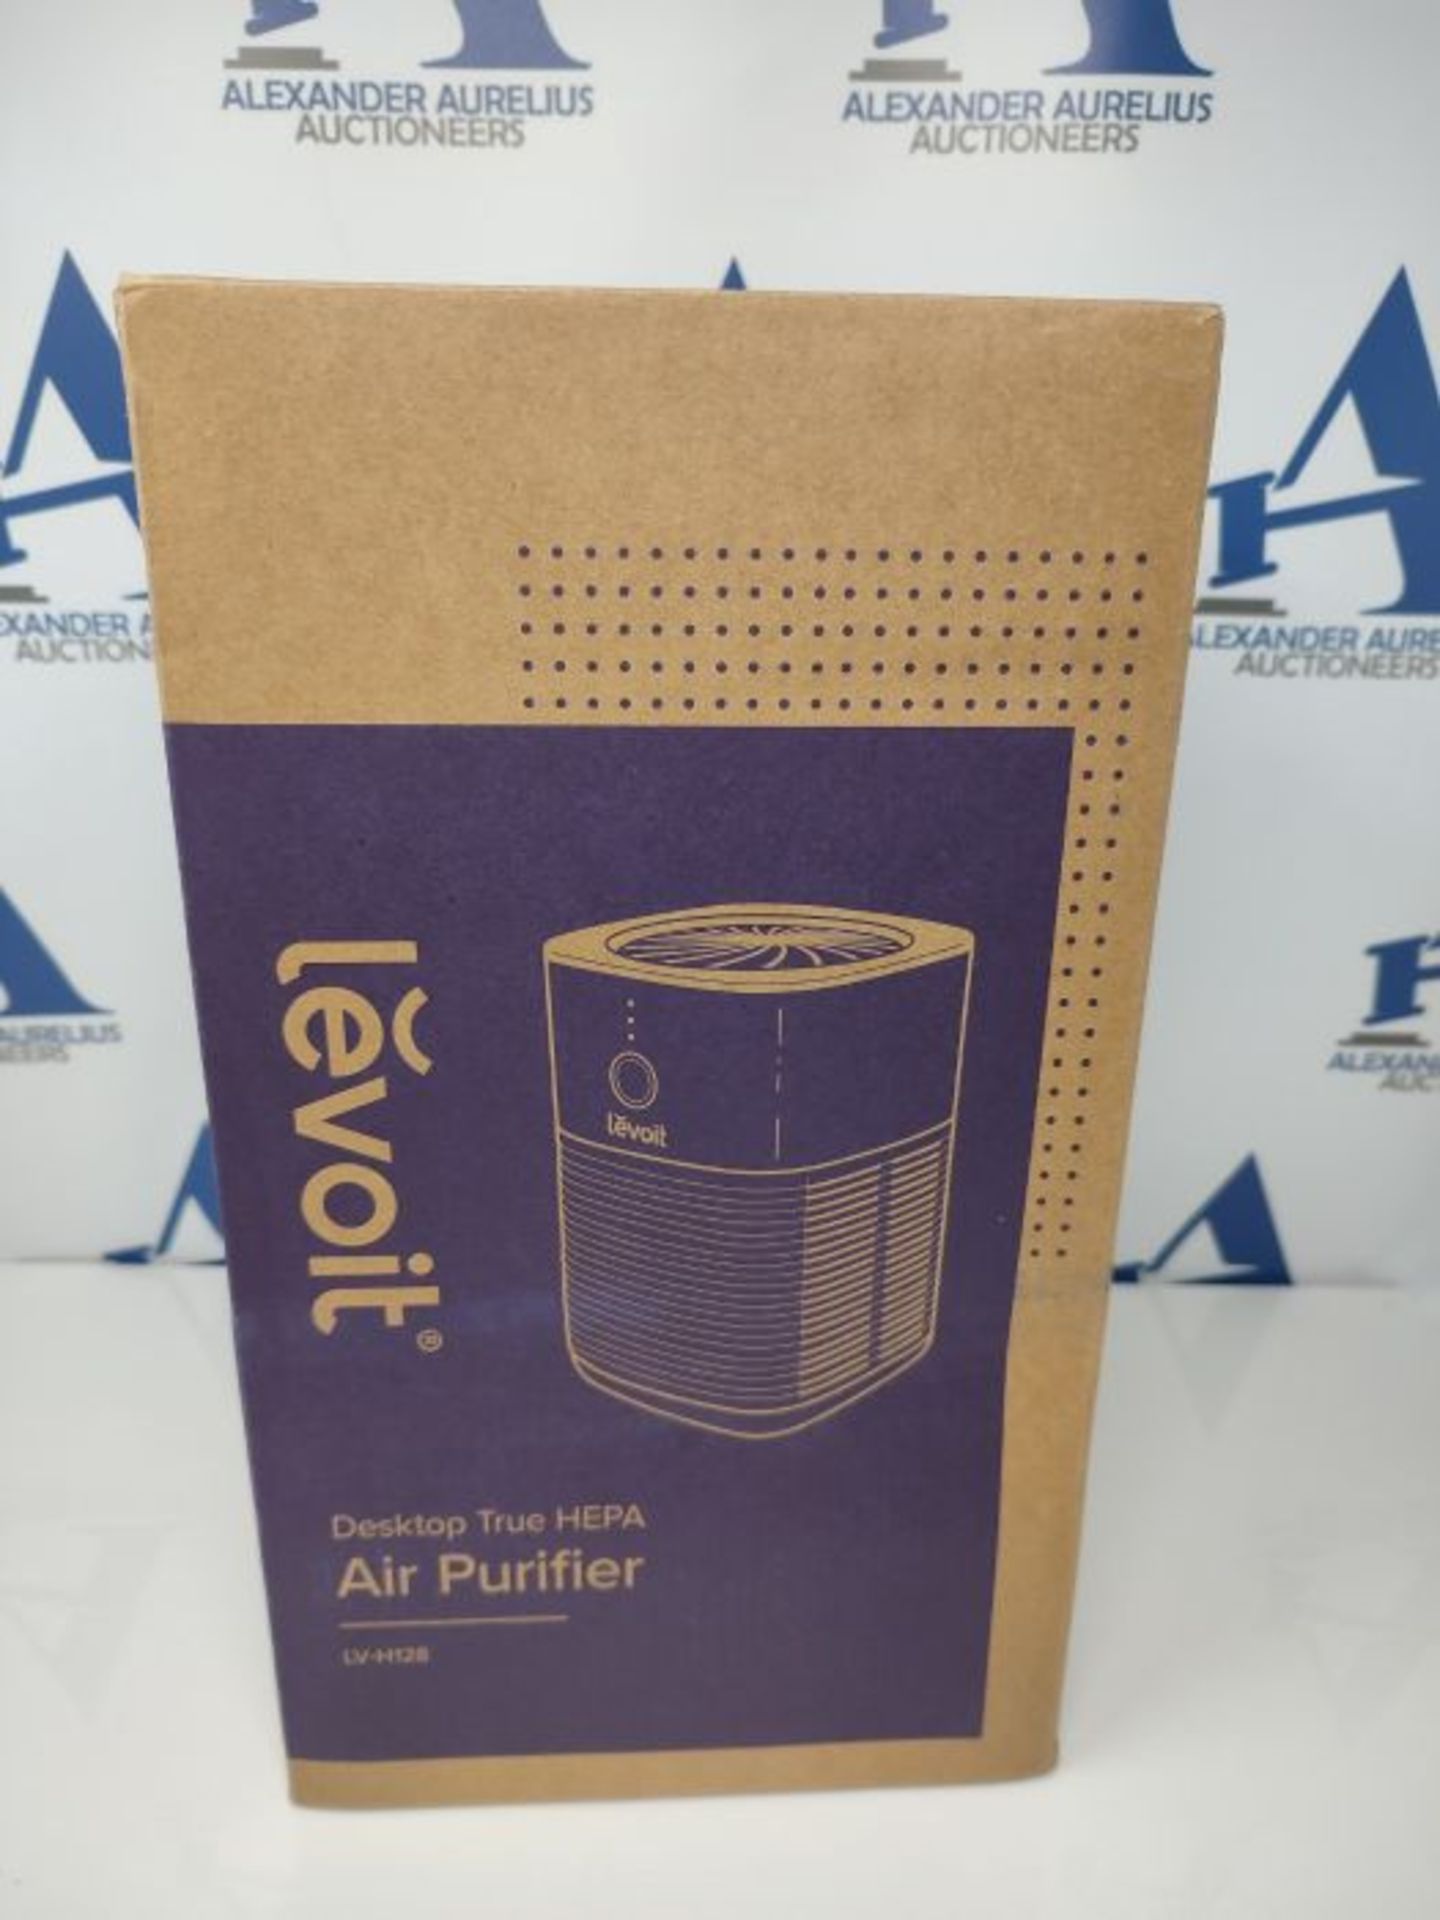 LEVOIT Air Purifier for Home Bedroom, Dual H13 HEPA Filters with Aromatherapy Diffuser - Image 2 of 3